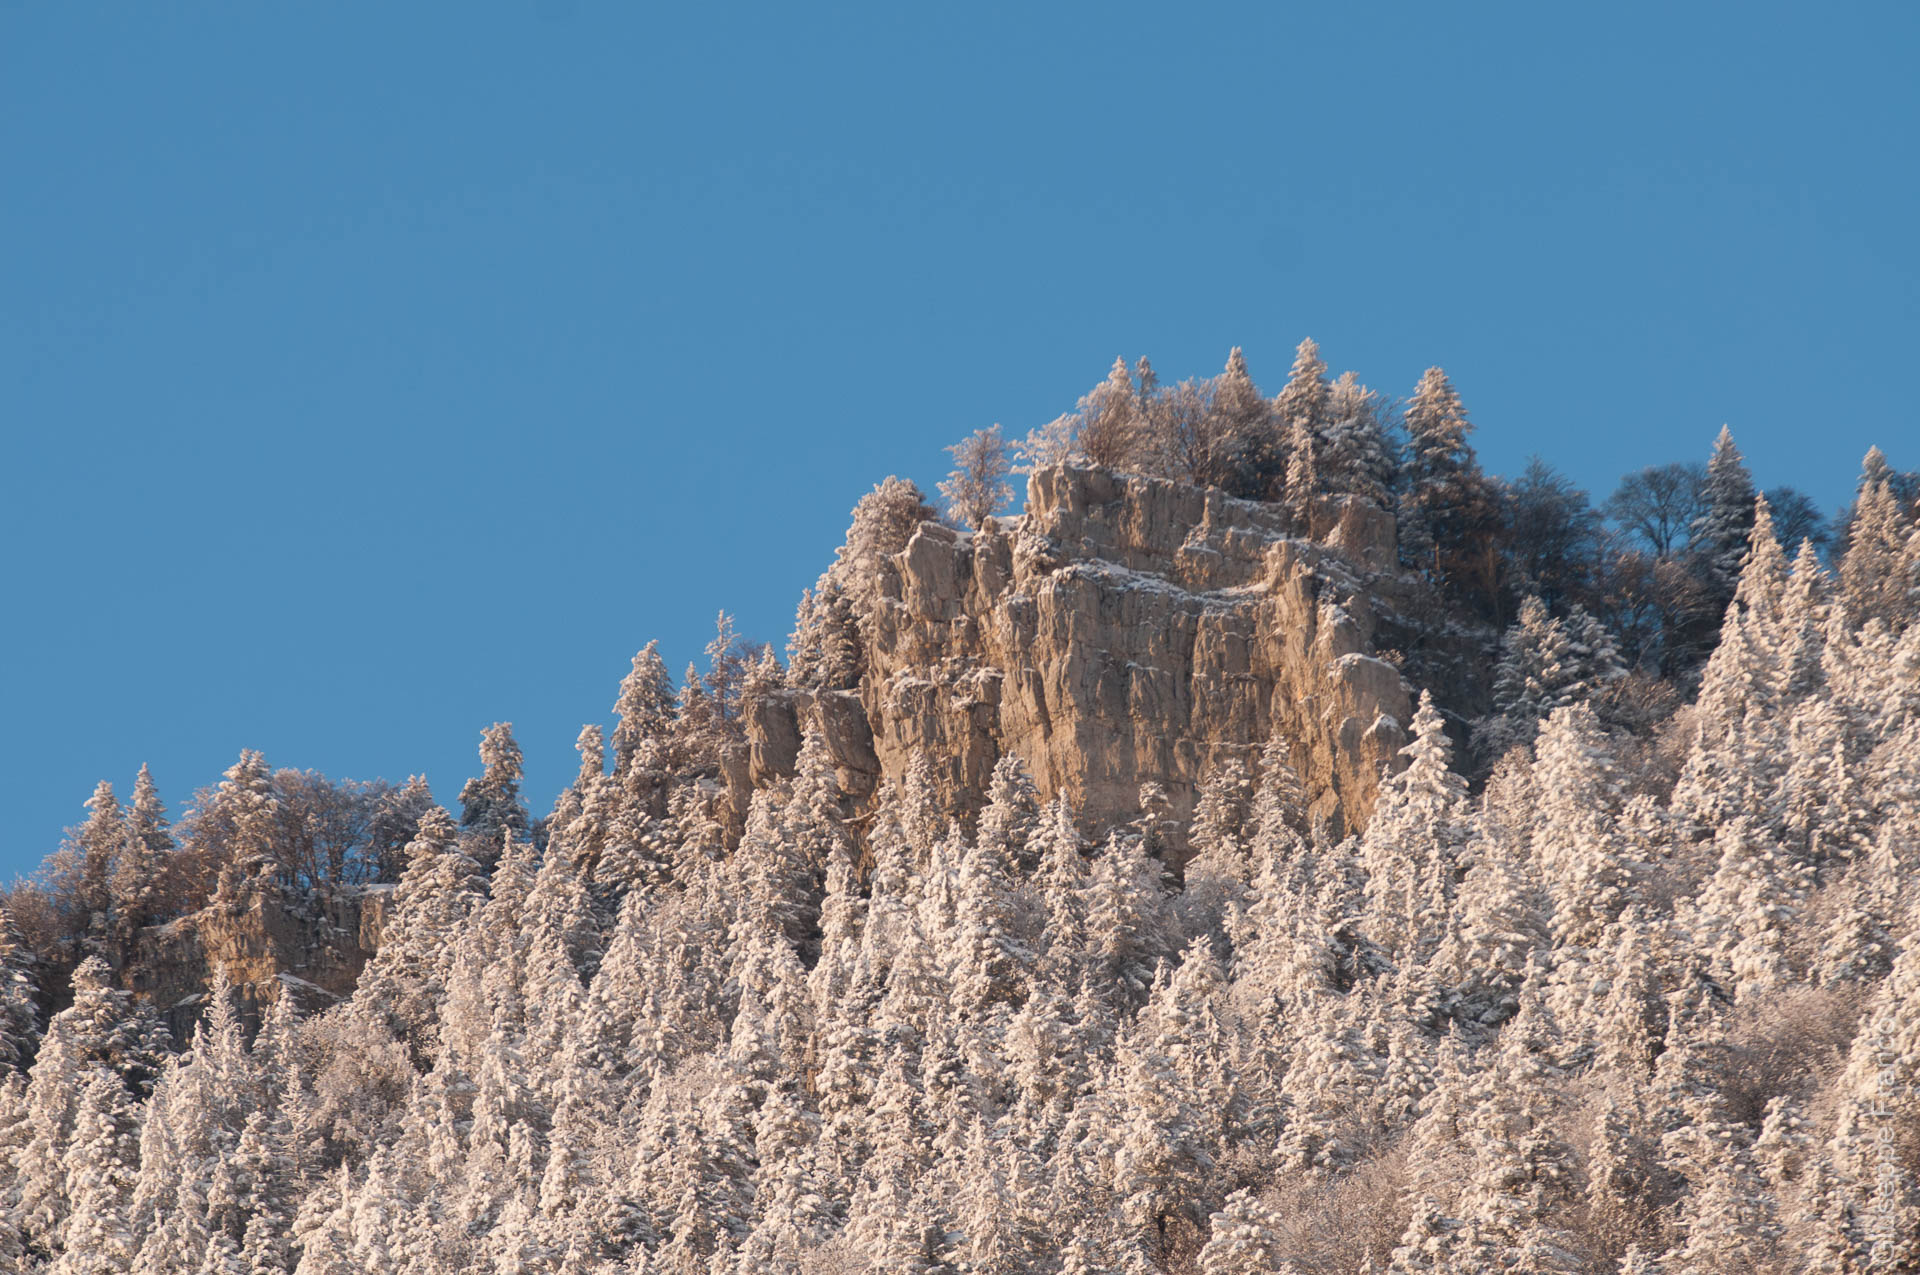 The trees on the Aiguilles de Baulmes are covered by ice and snow after the extreme temperature.